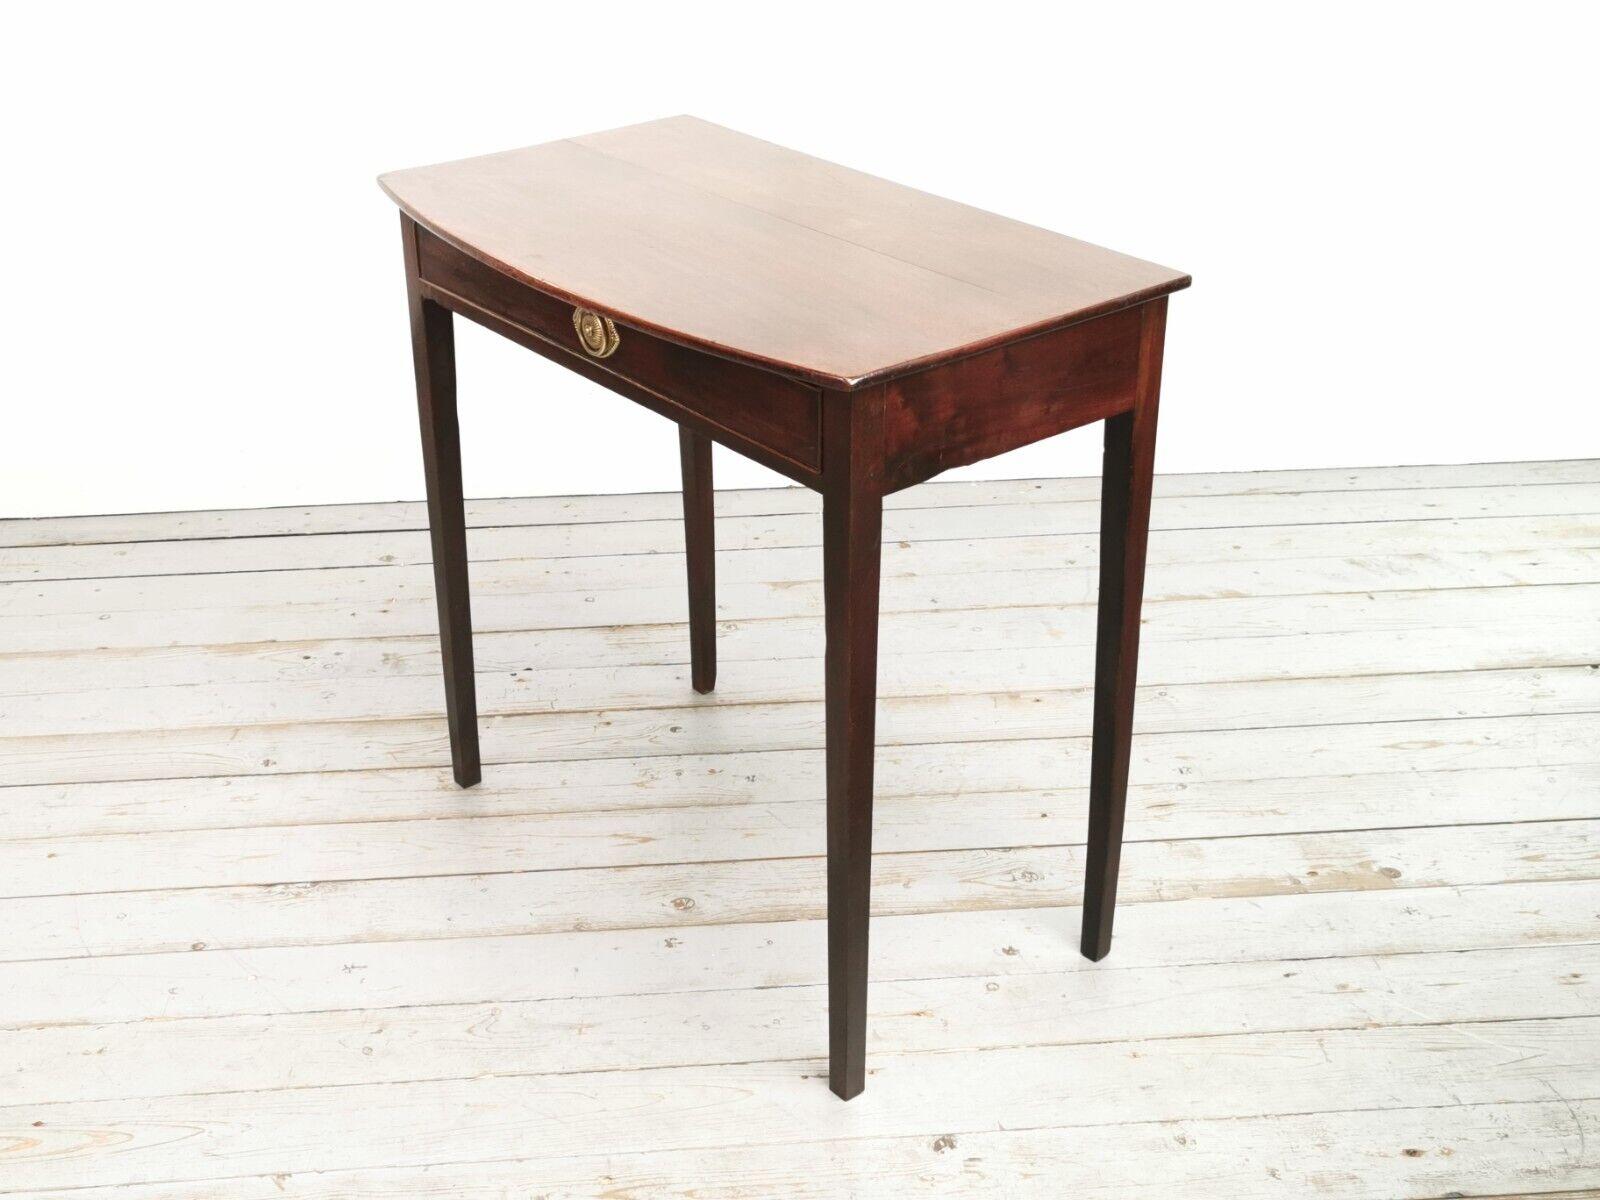 Antique Side Table

Early 19th century English compact side table or writing desk.

Made from mahogany, the drawer features a brass drawer pull, and the oversailing bow fronted table top is raised on tapered square legs.

Dimensions (cm):​ ​

77 H x